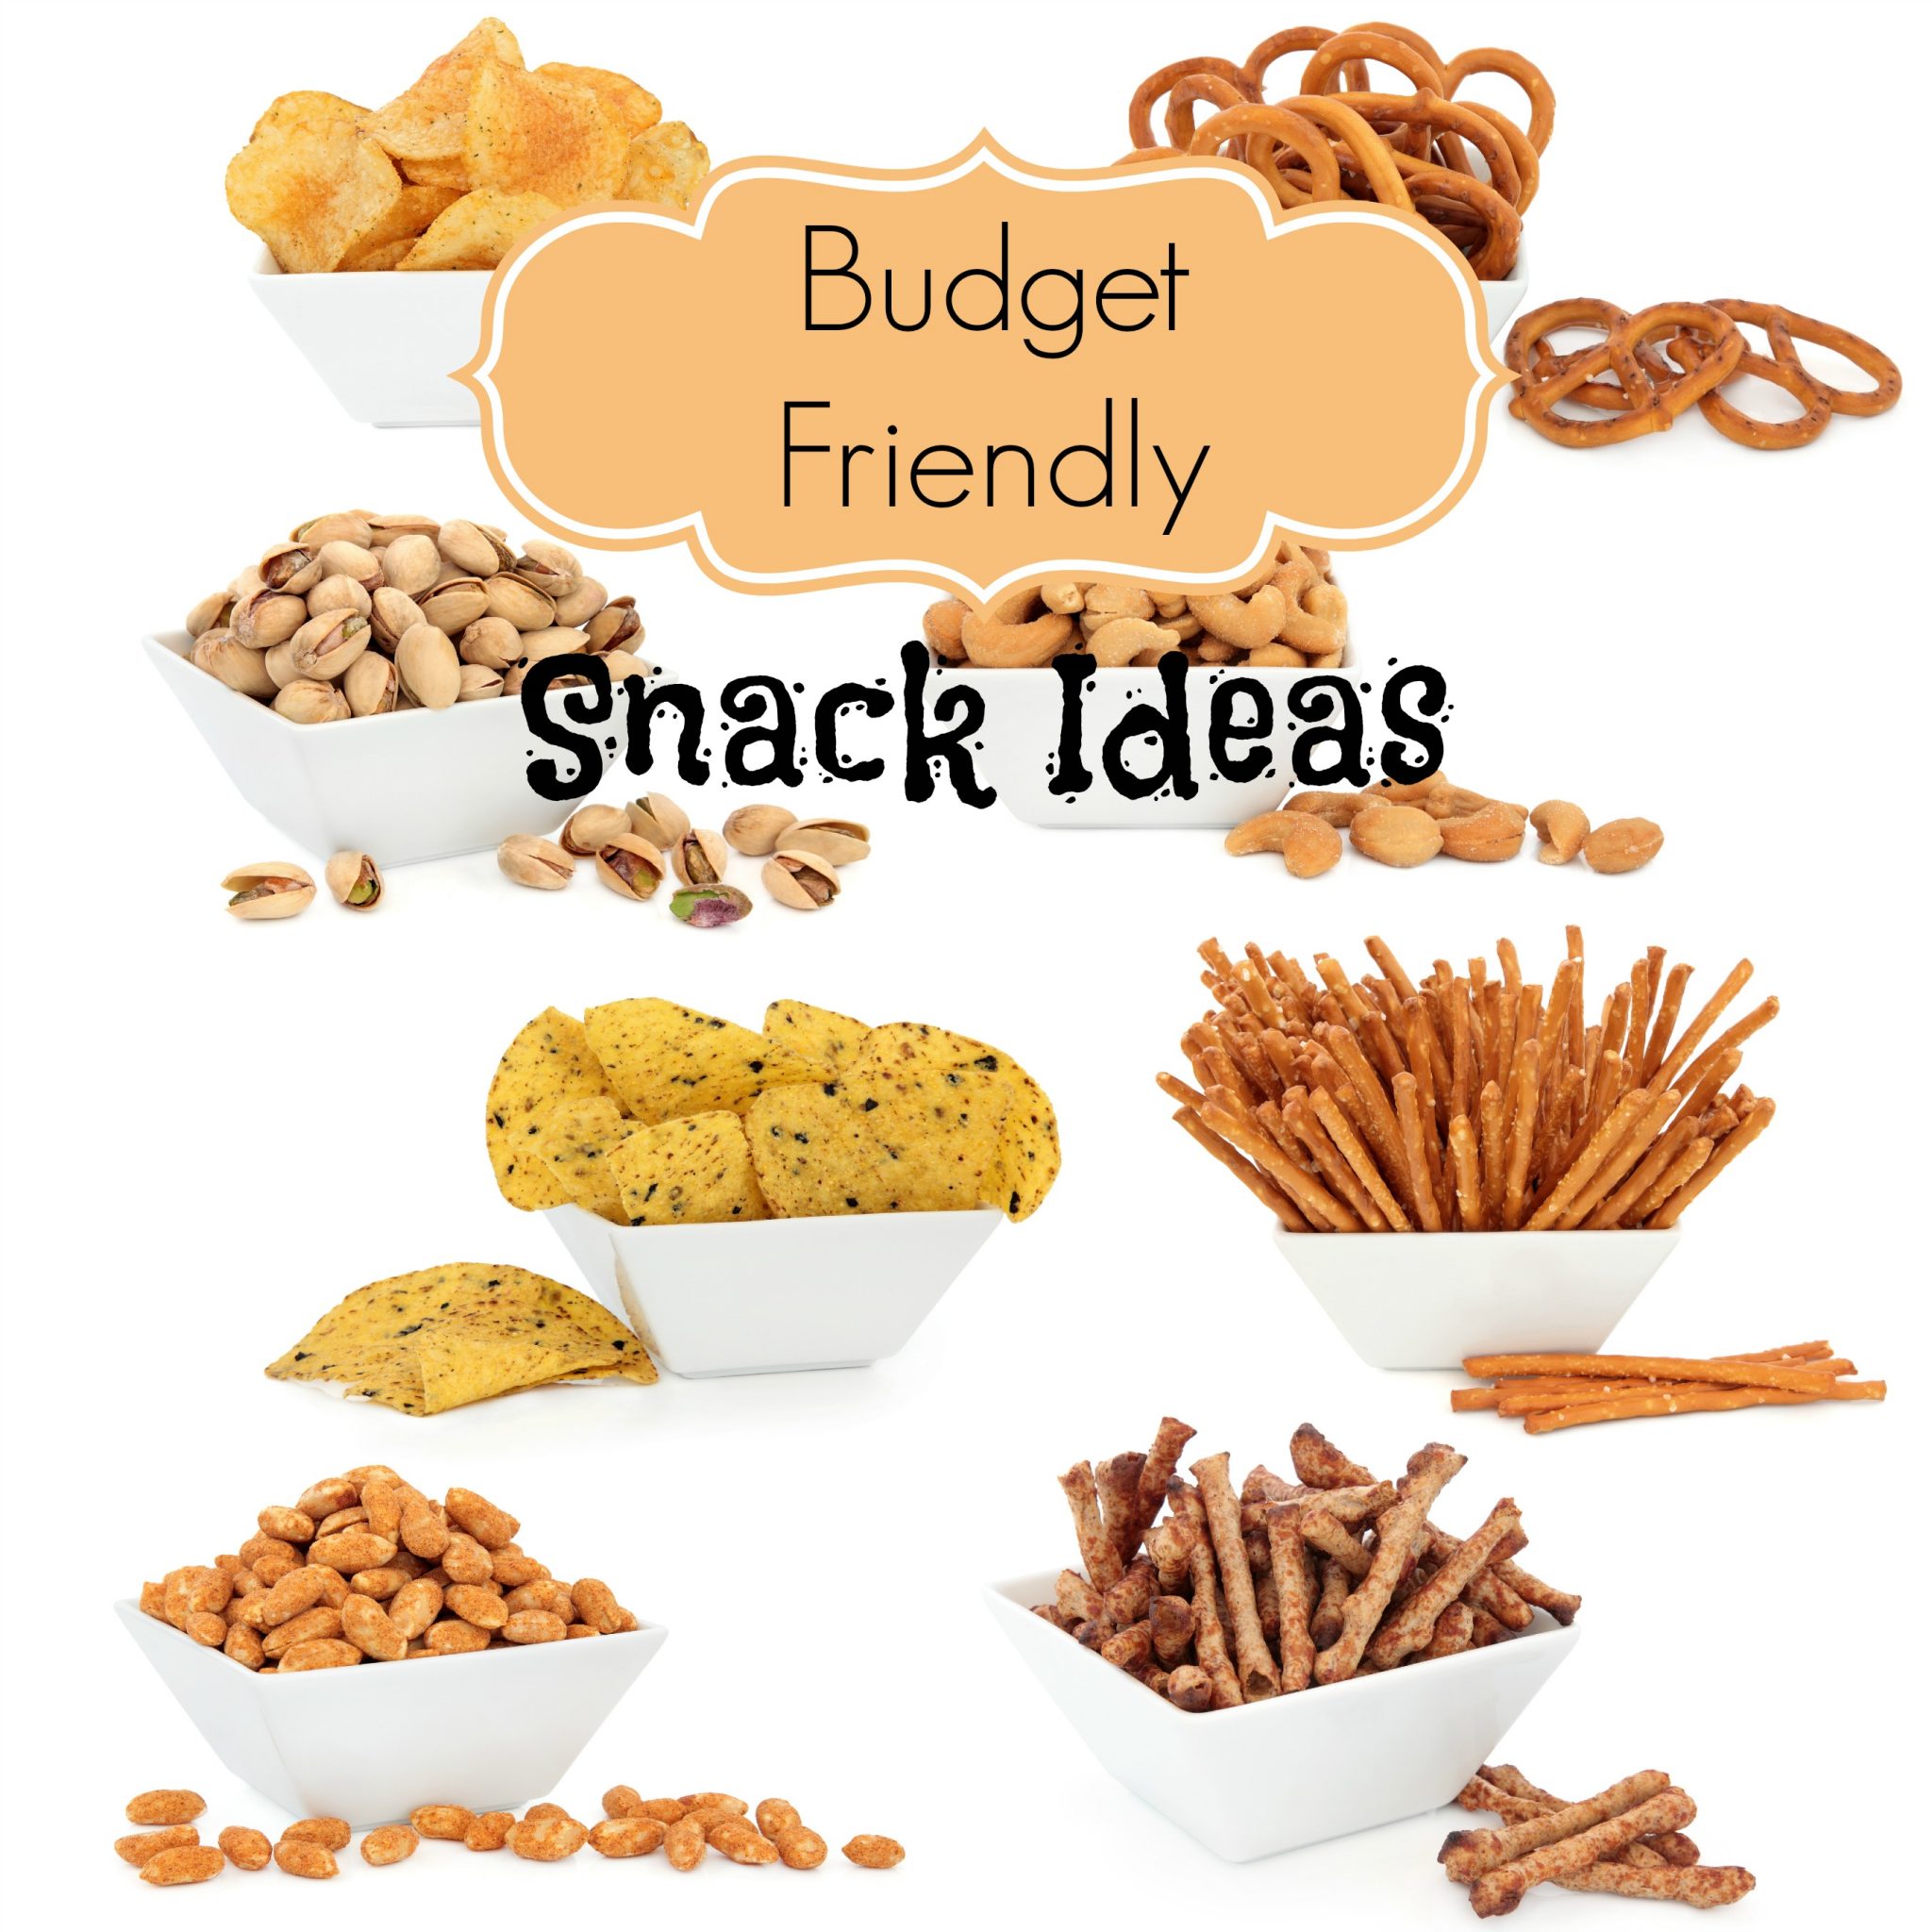 Hey snackers!  These Snack Ideas on a Budget will keep both you and your bank account healthy!